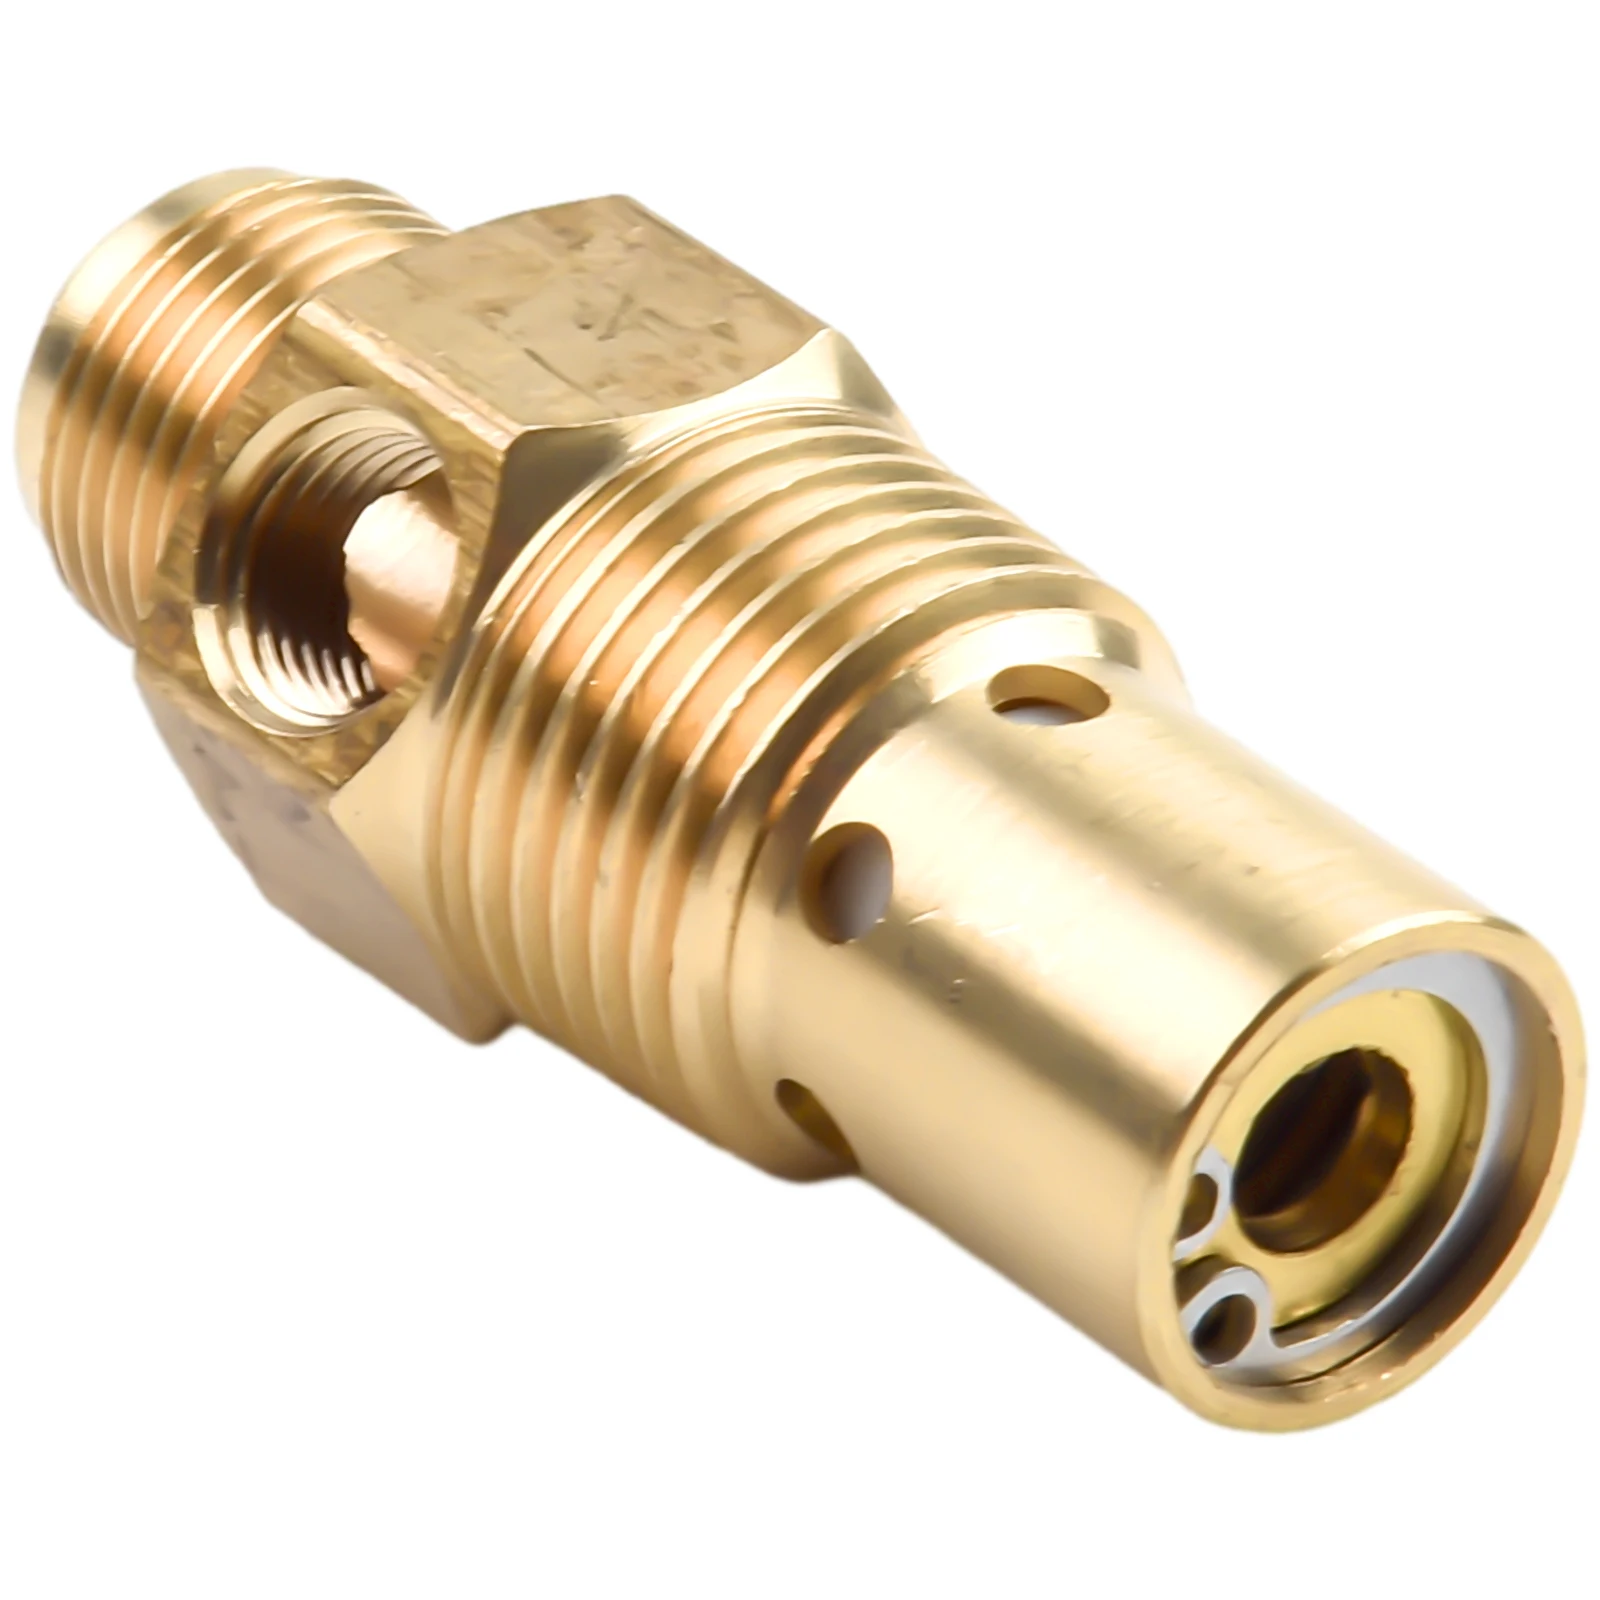 Brass Check Valve G3/8 Air Compressor Male Threaded NPT×1/2In For Air Compressor Replacement Radiator Check Valve 42 40mm air compressor pressure gauge double scale 0 12ba 0 180psi big dial male thread bottom air pump accessories